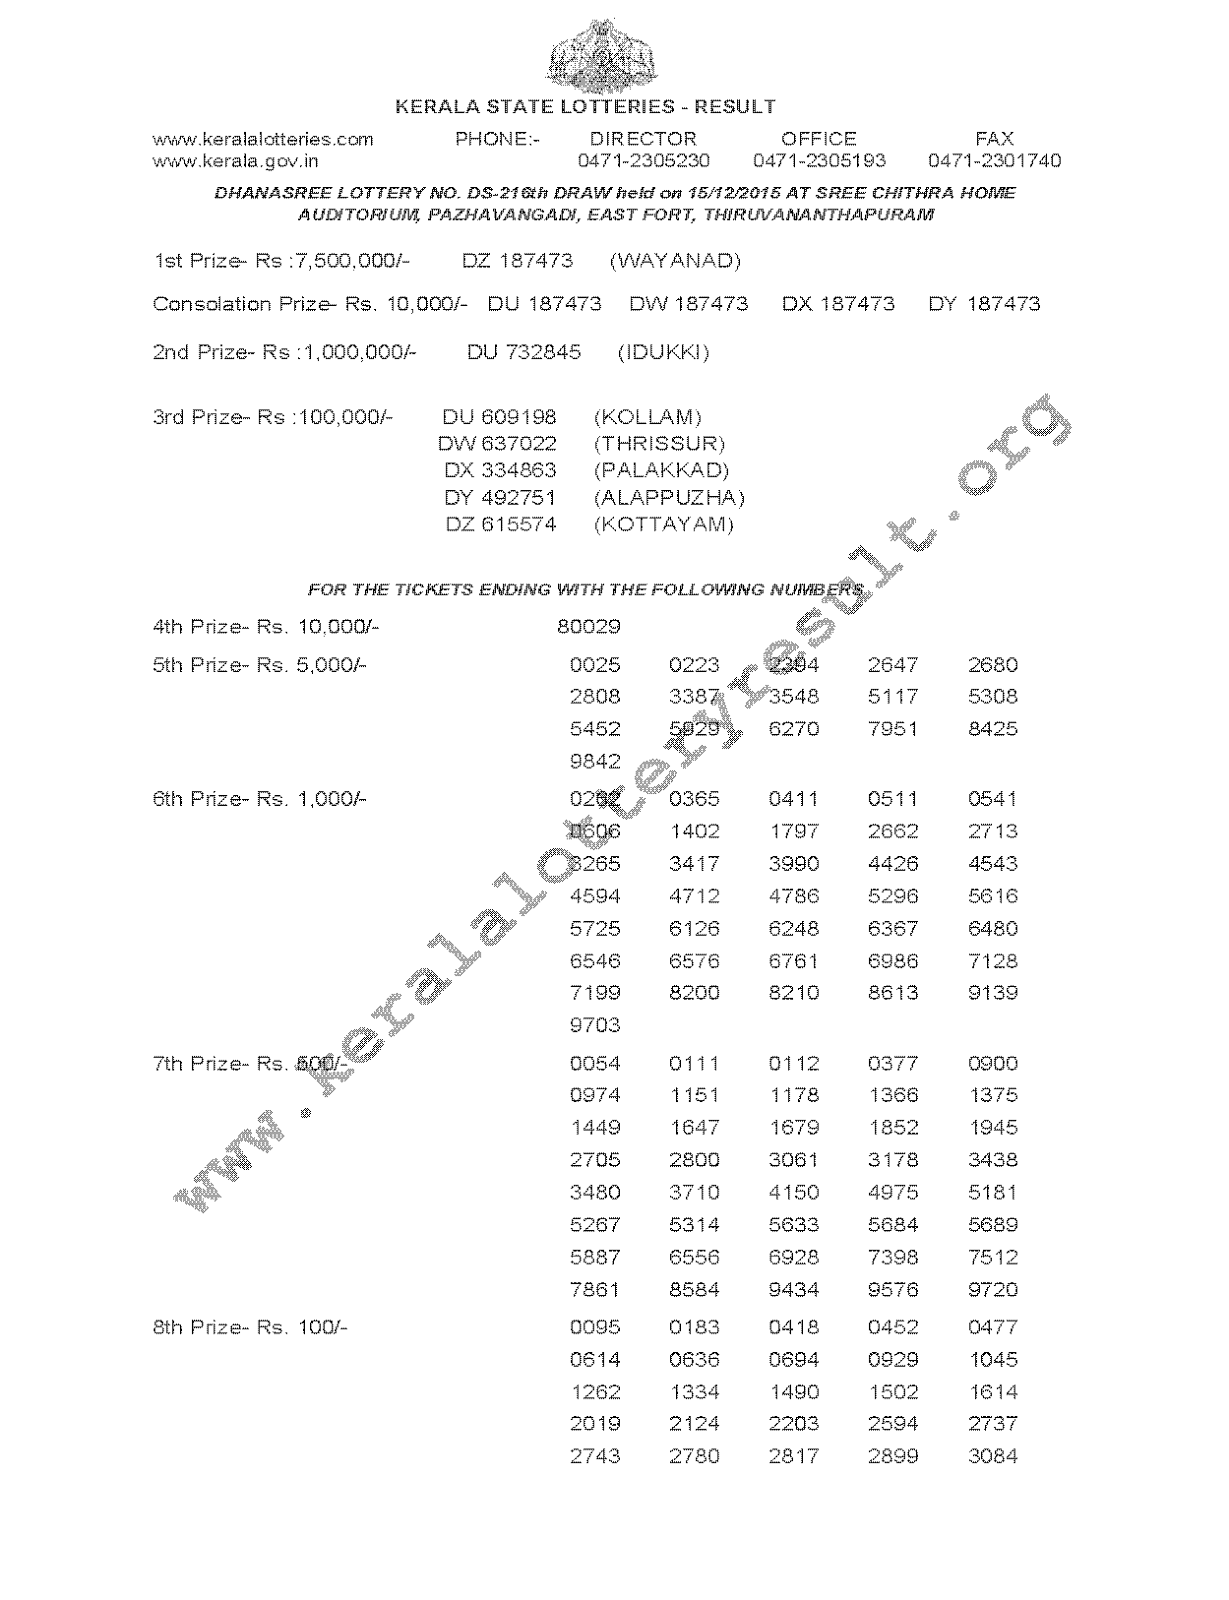 DHANASREE Lottery DS 216 Result 15-12-2015